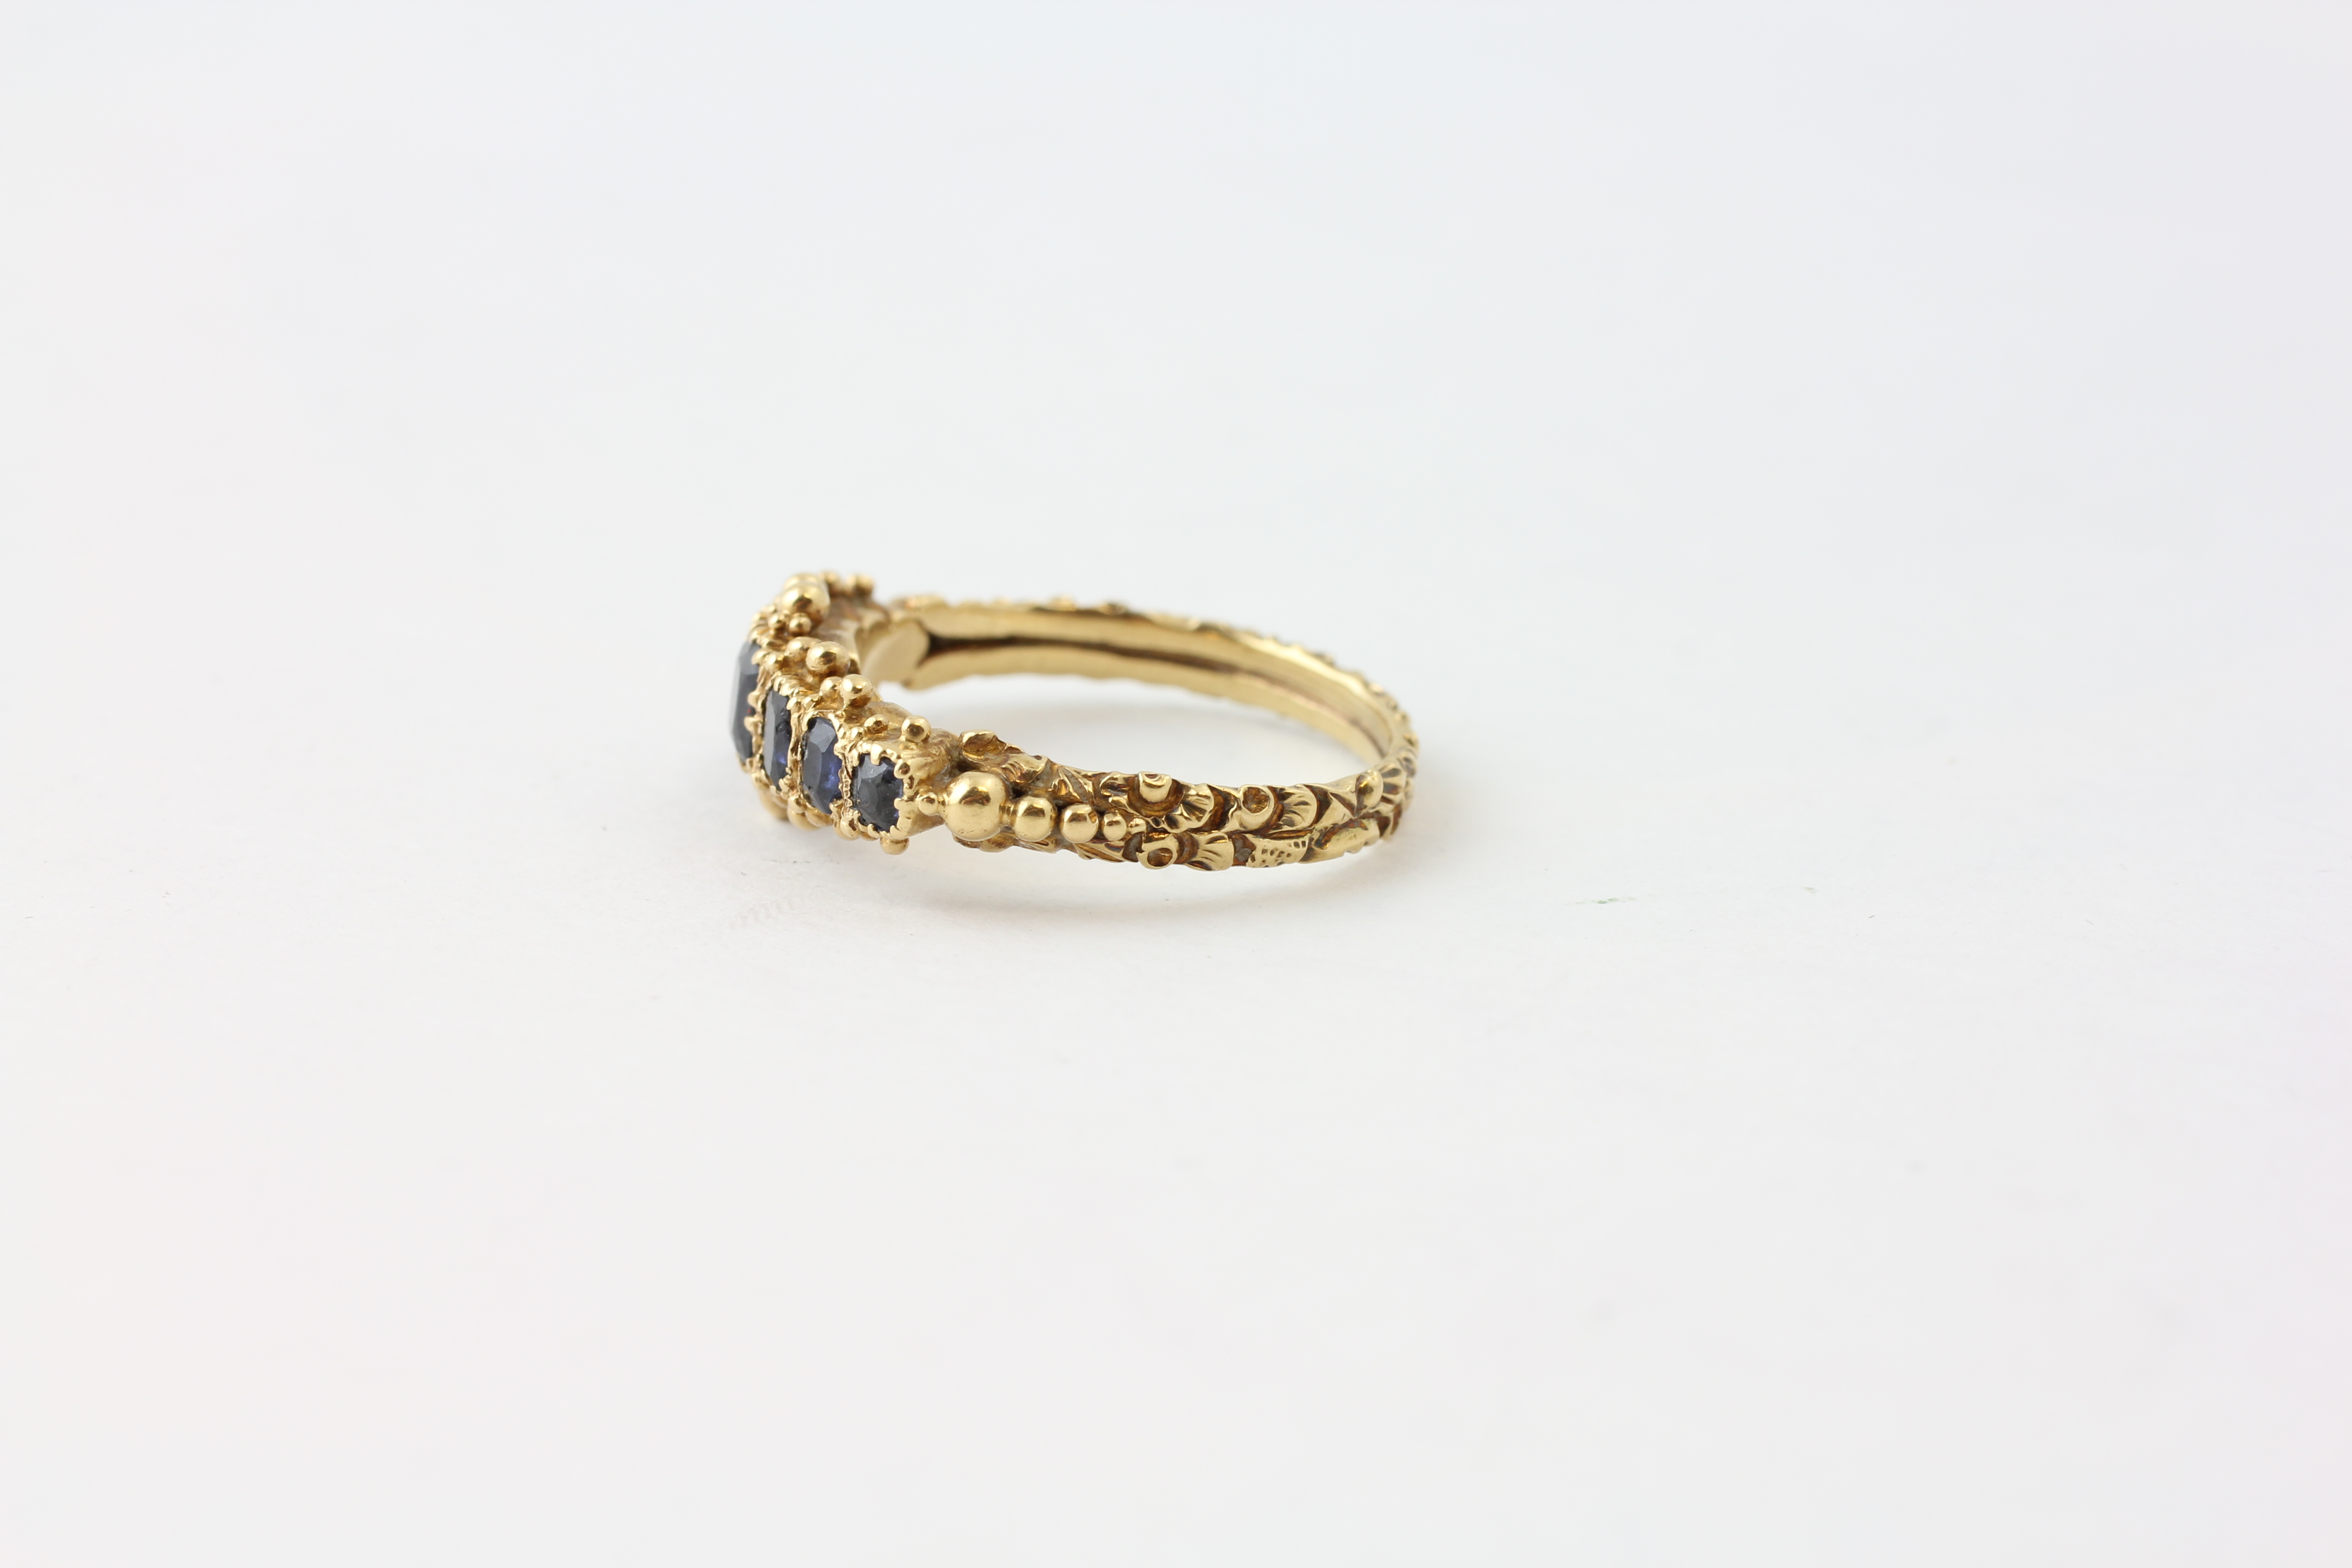 A SAPPHIRE RING, FIVE GRADUATED STONES, CLAW SET IN UNMARKED GOLD, THE LARGEST STONE APPROX. - Image 3 of 5